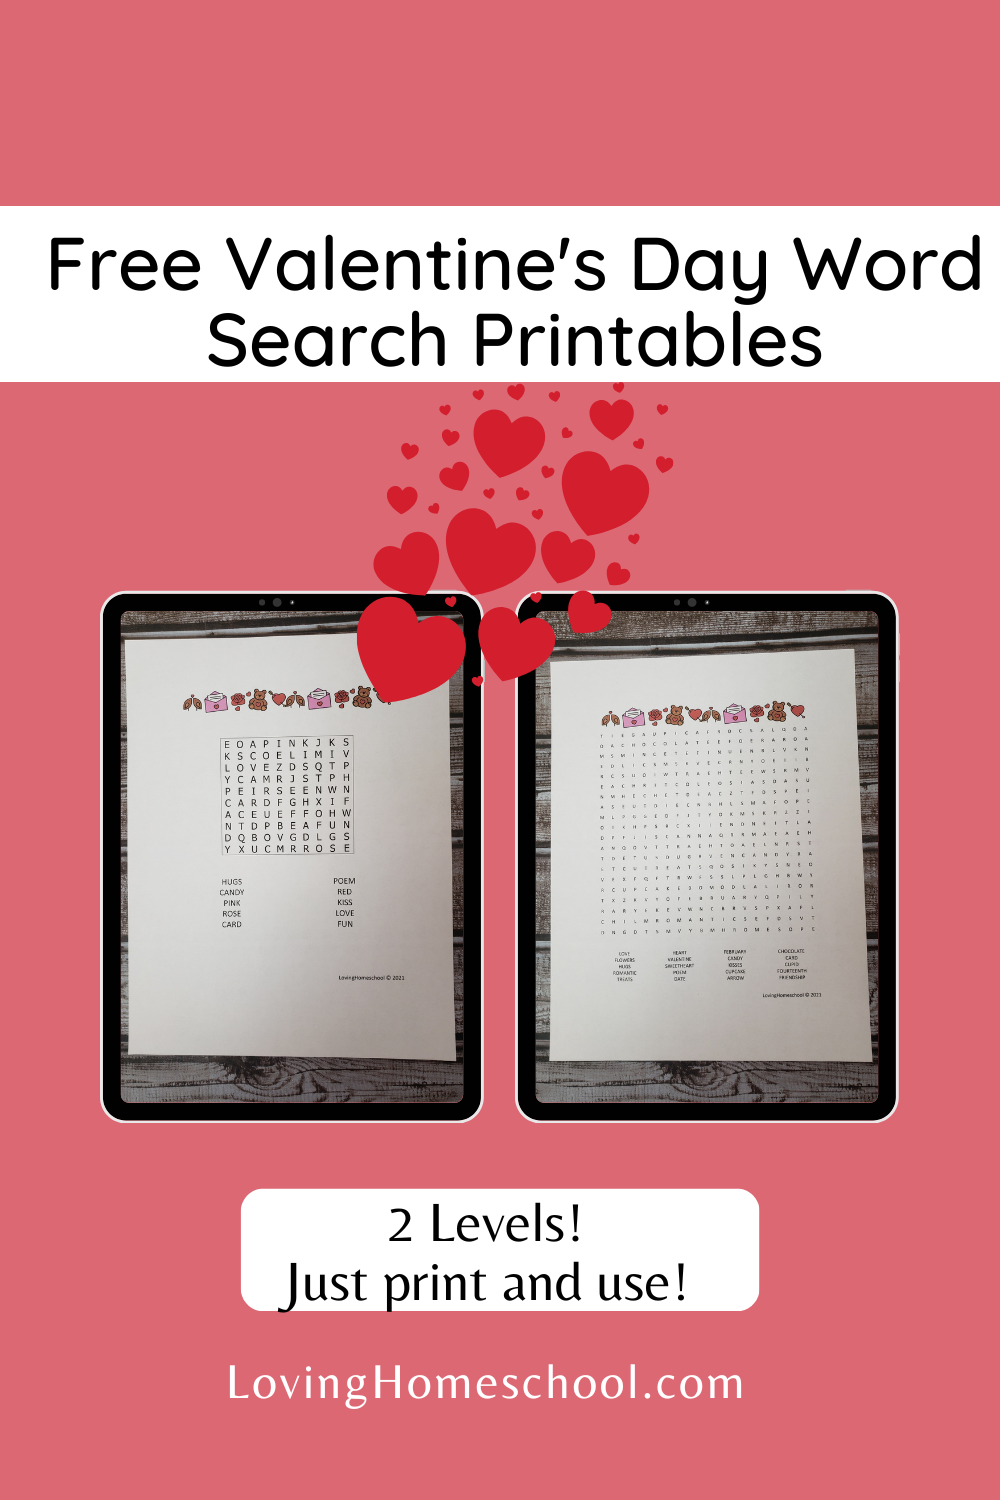 Valentine's Day Word Search Pinterest Pin